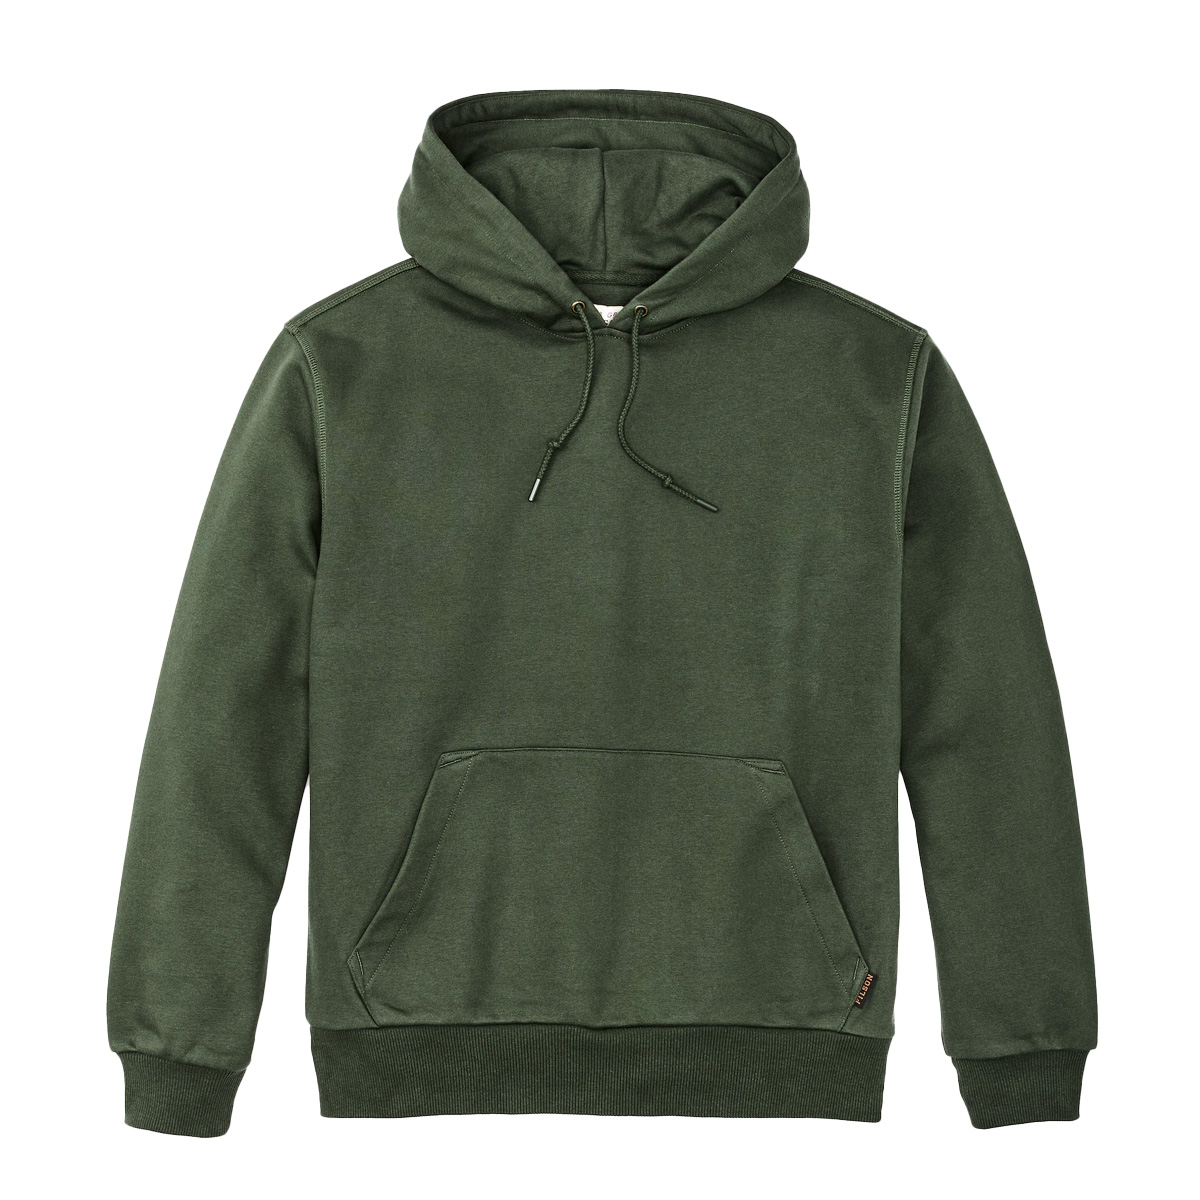 Filson Prospector Hoodie Kombu Green, an ideal baselayer in cold weather conditions